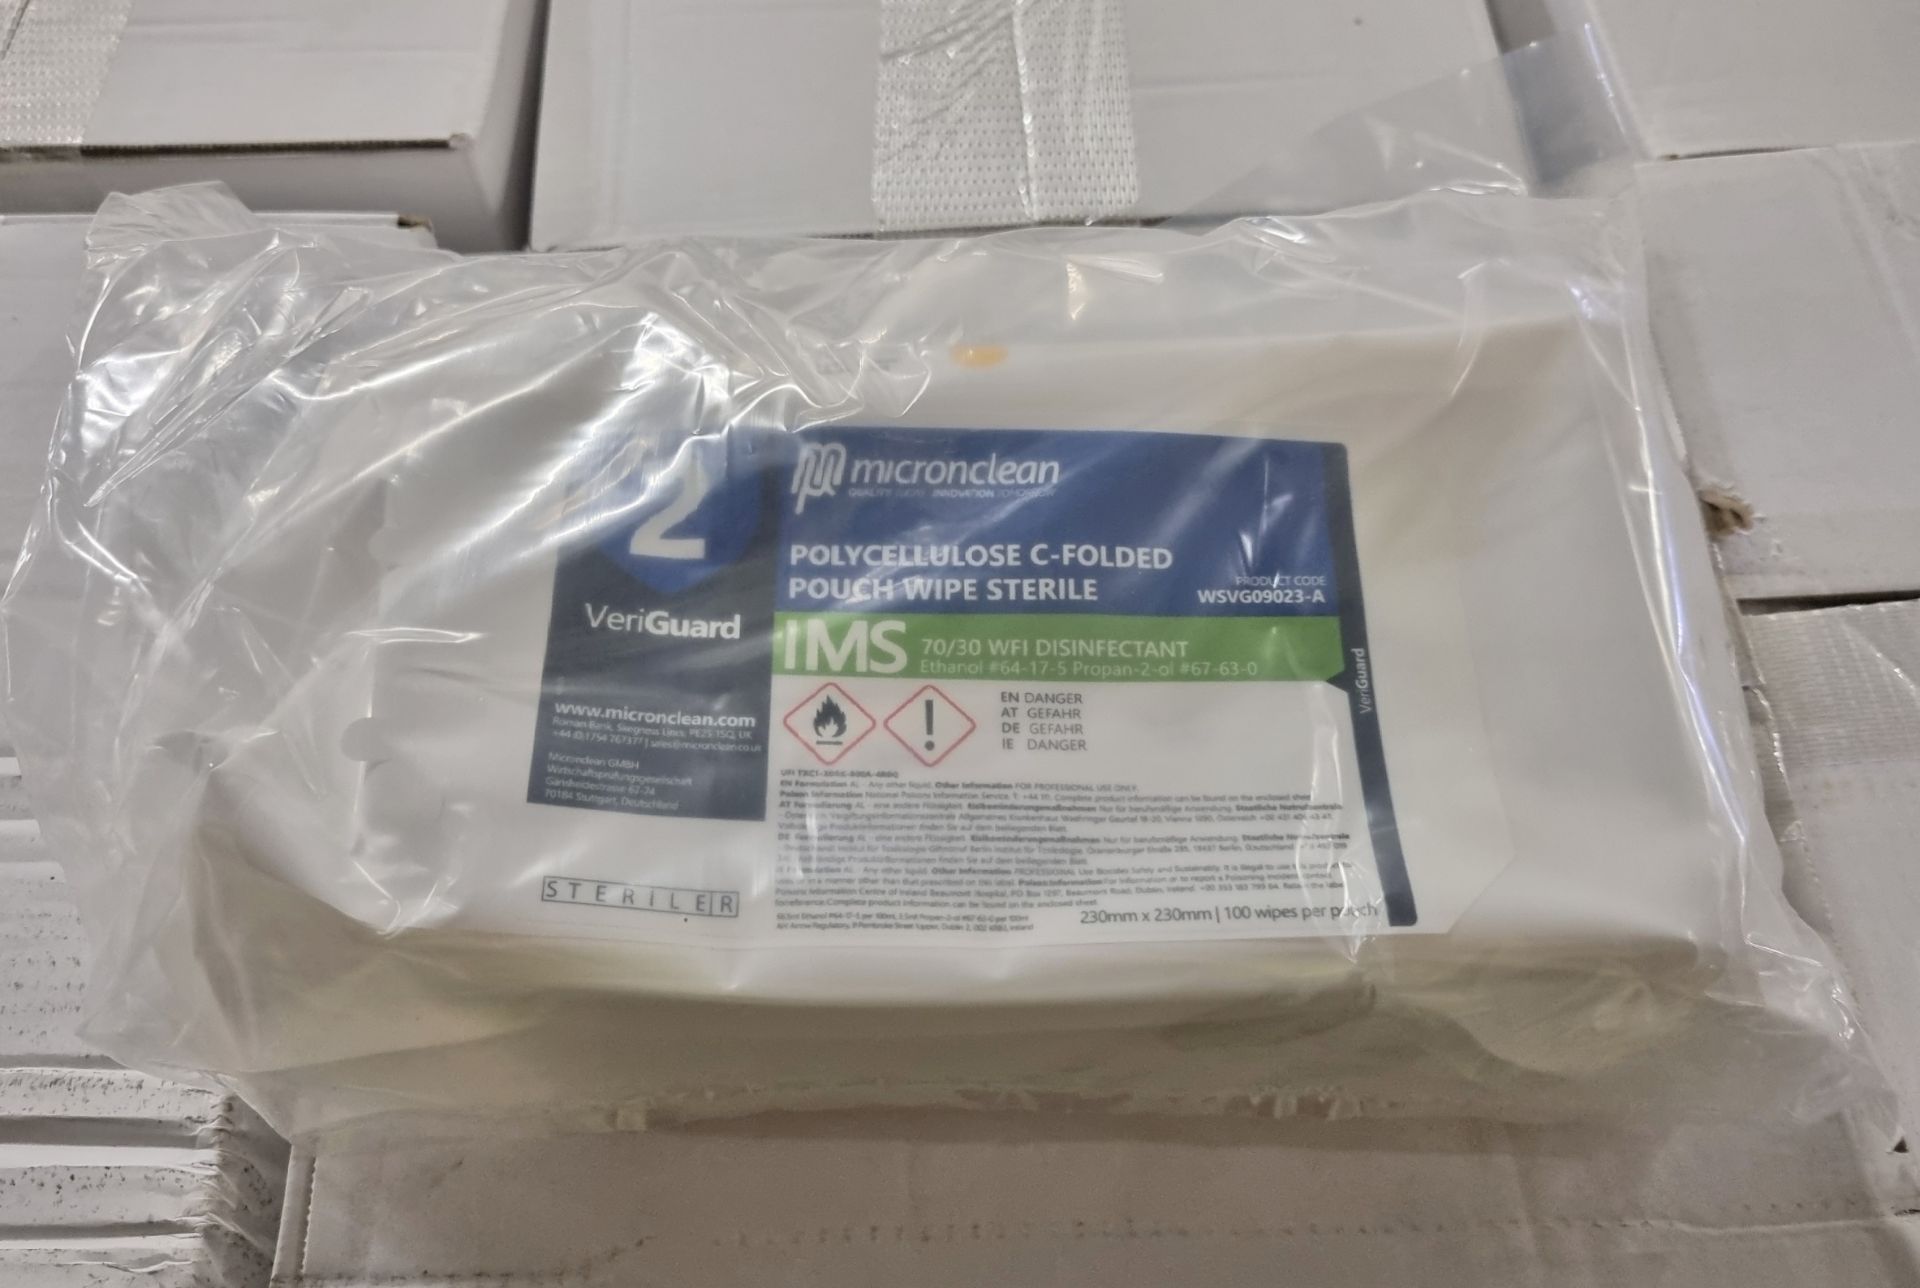 33x boxes of Micronclean Veriguard Polycellulose C-folded pouch wipe sterile - 230mm x 230mm - Image 2 of 4